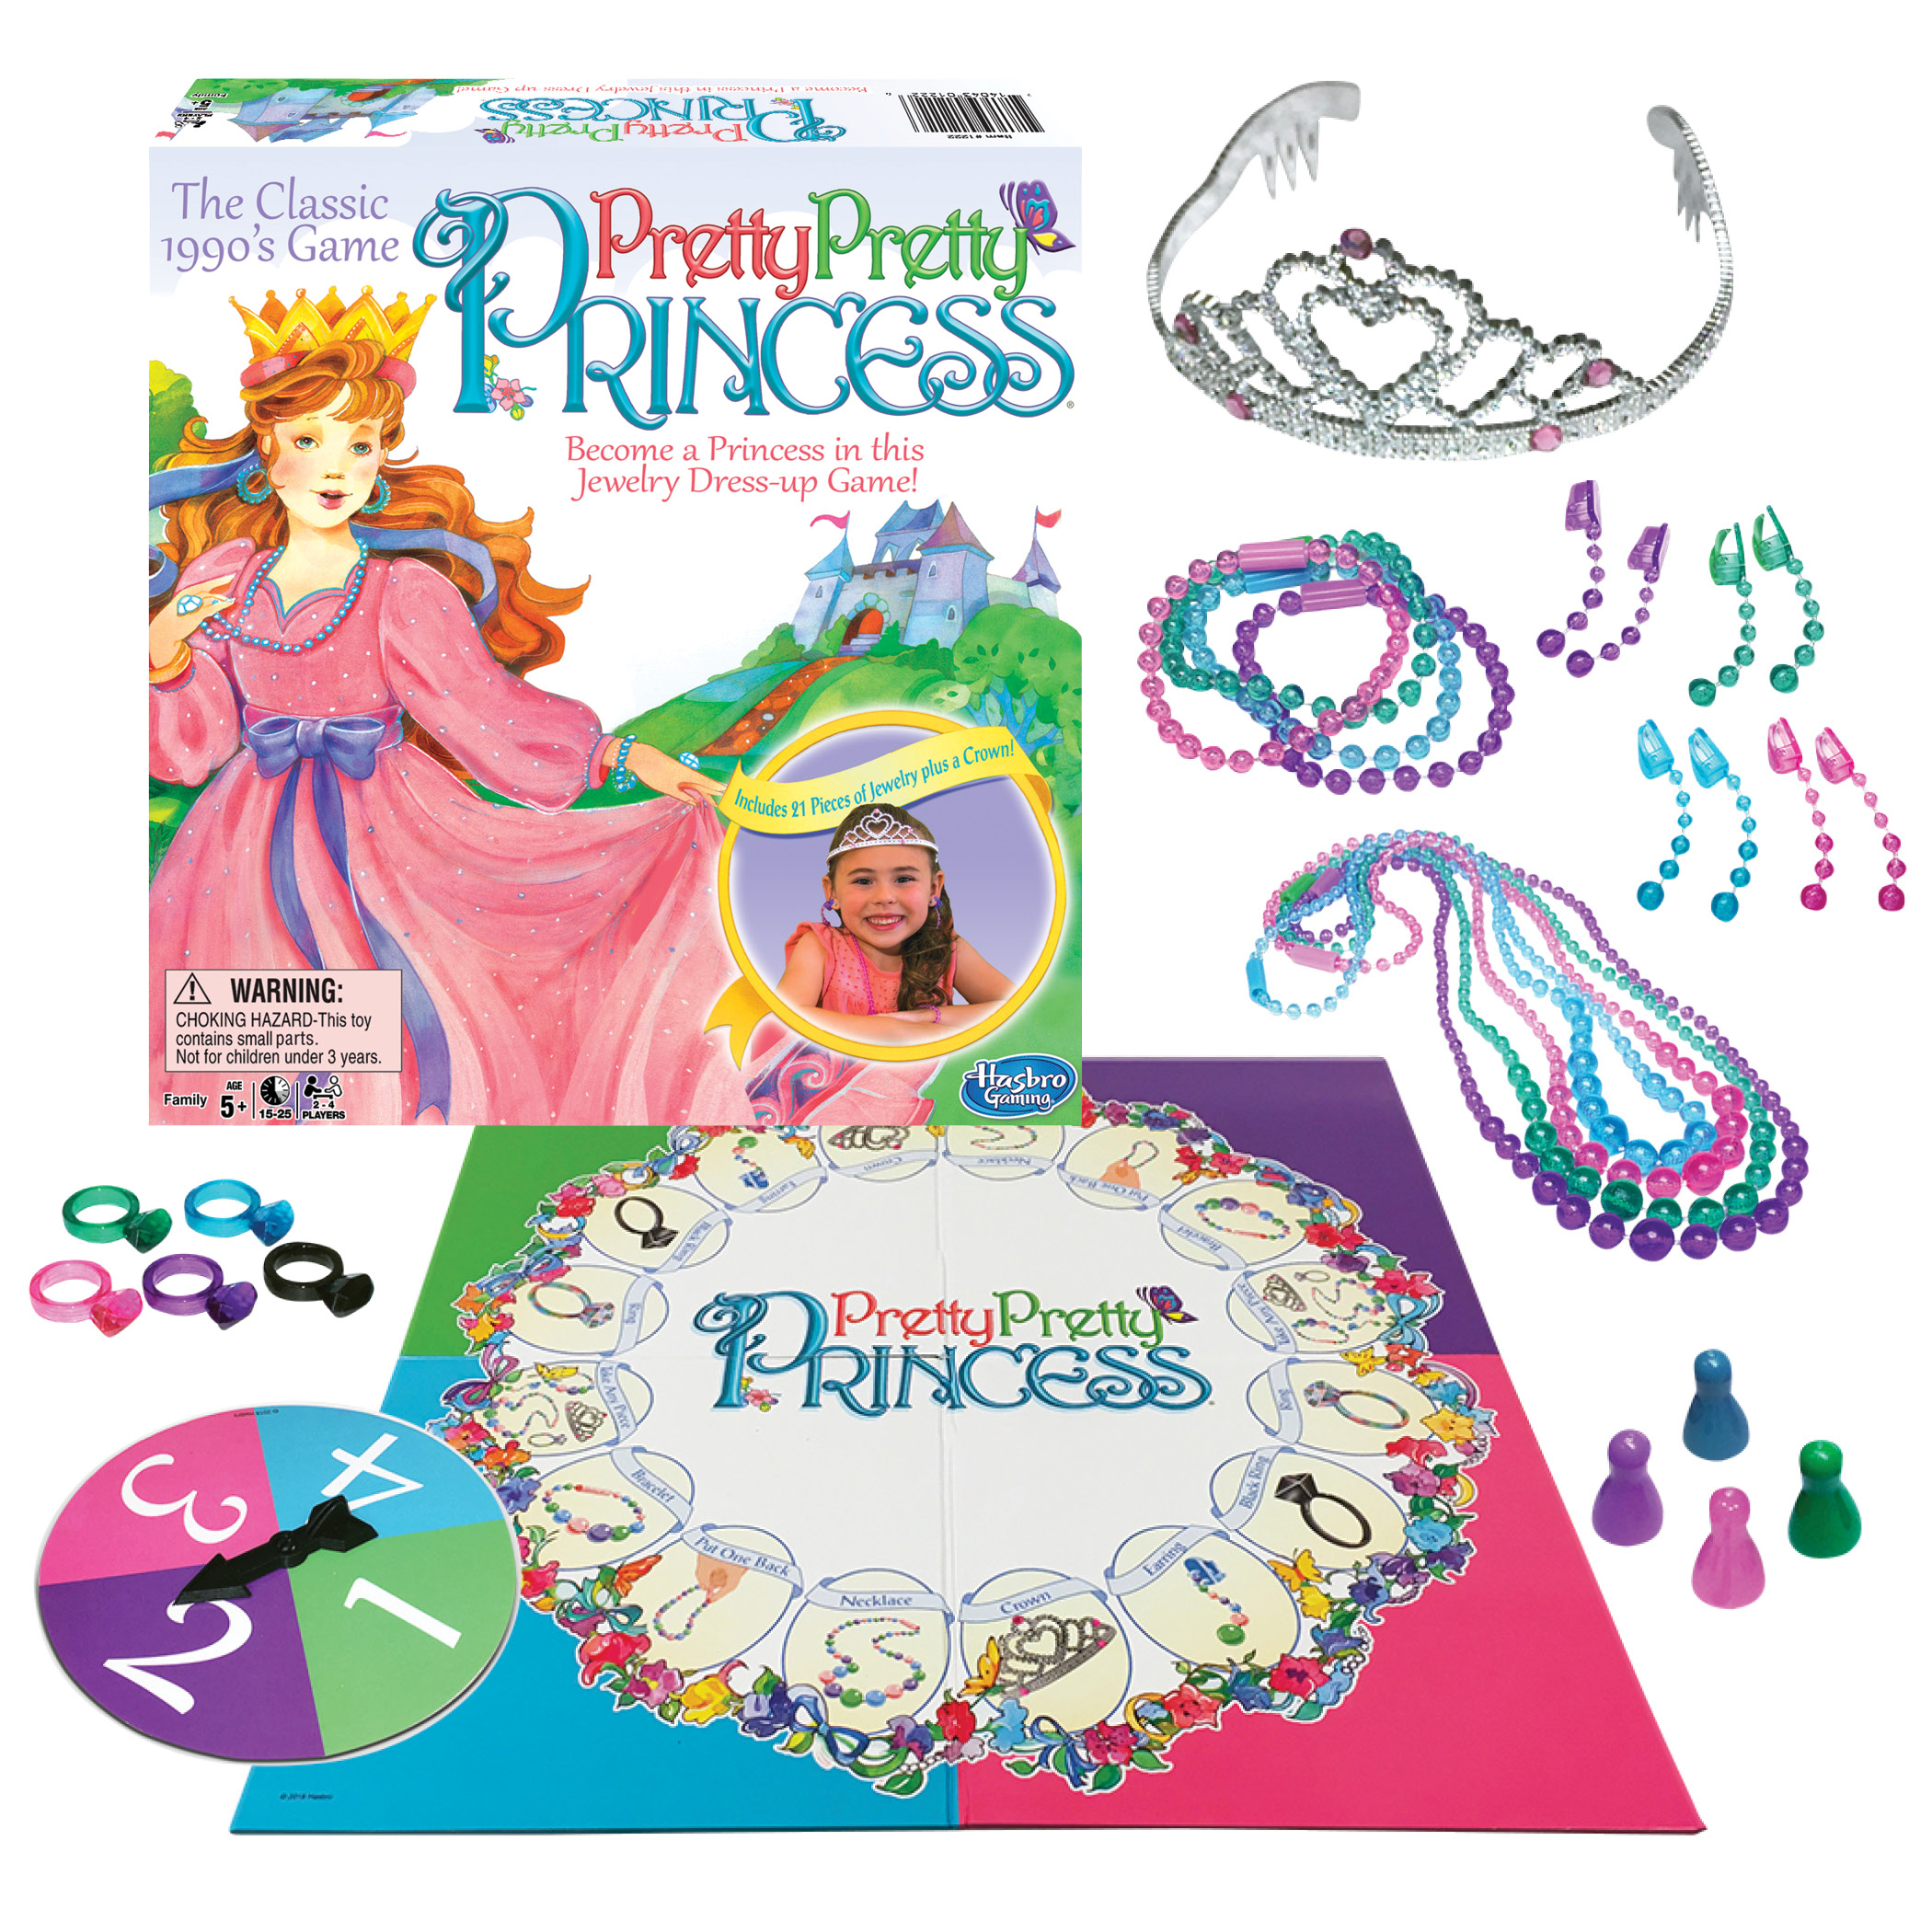 Pretty Pretty Princess Game Jewelry Dress Up Board Game 1990's Classic Toy Tiara Necklaces - image 5 of 6